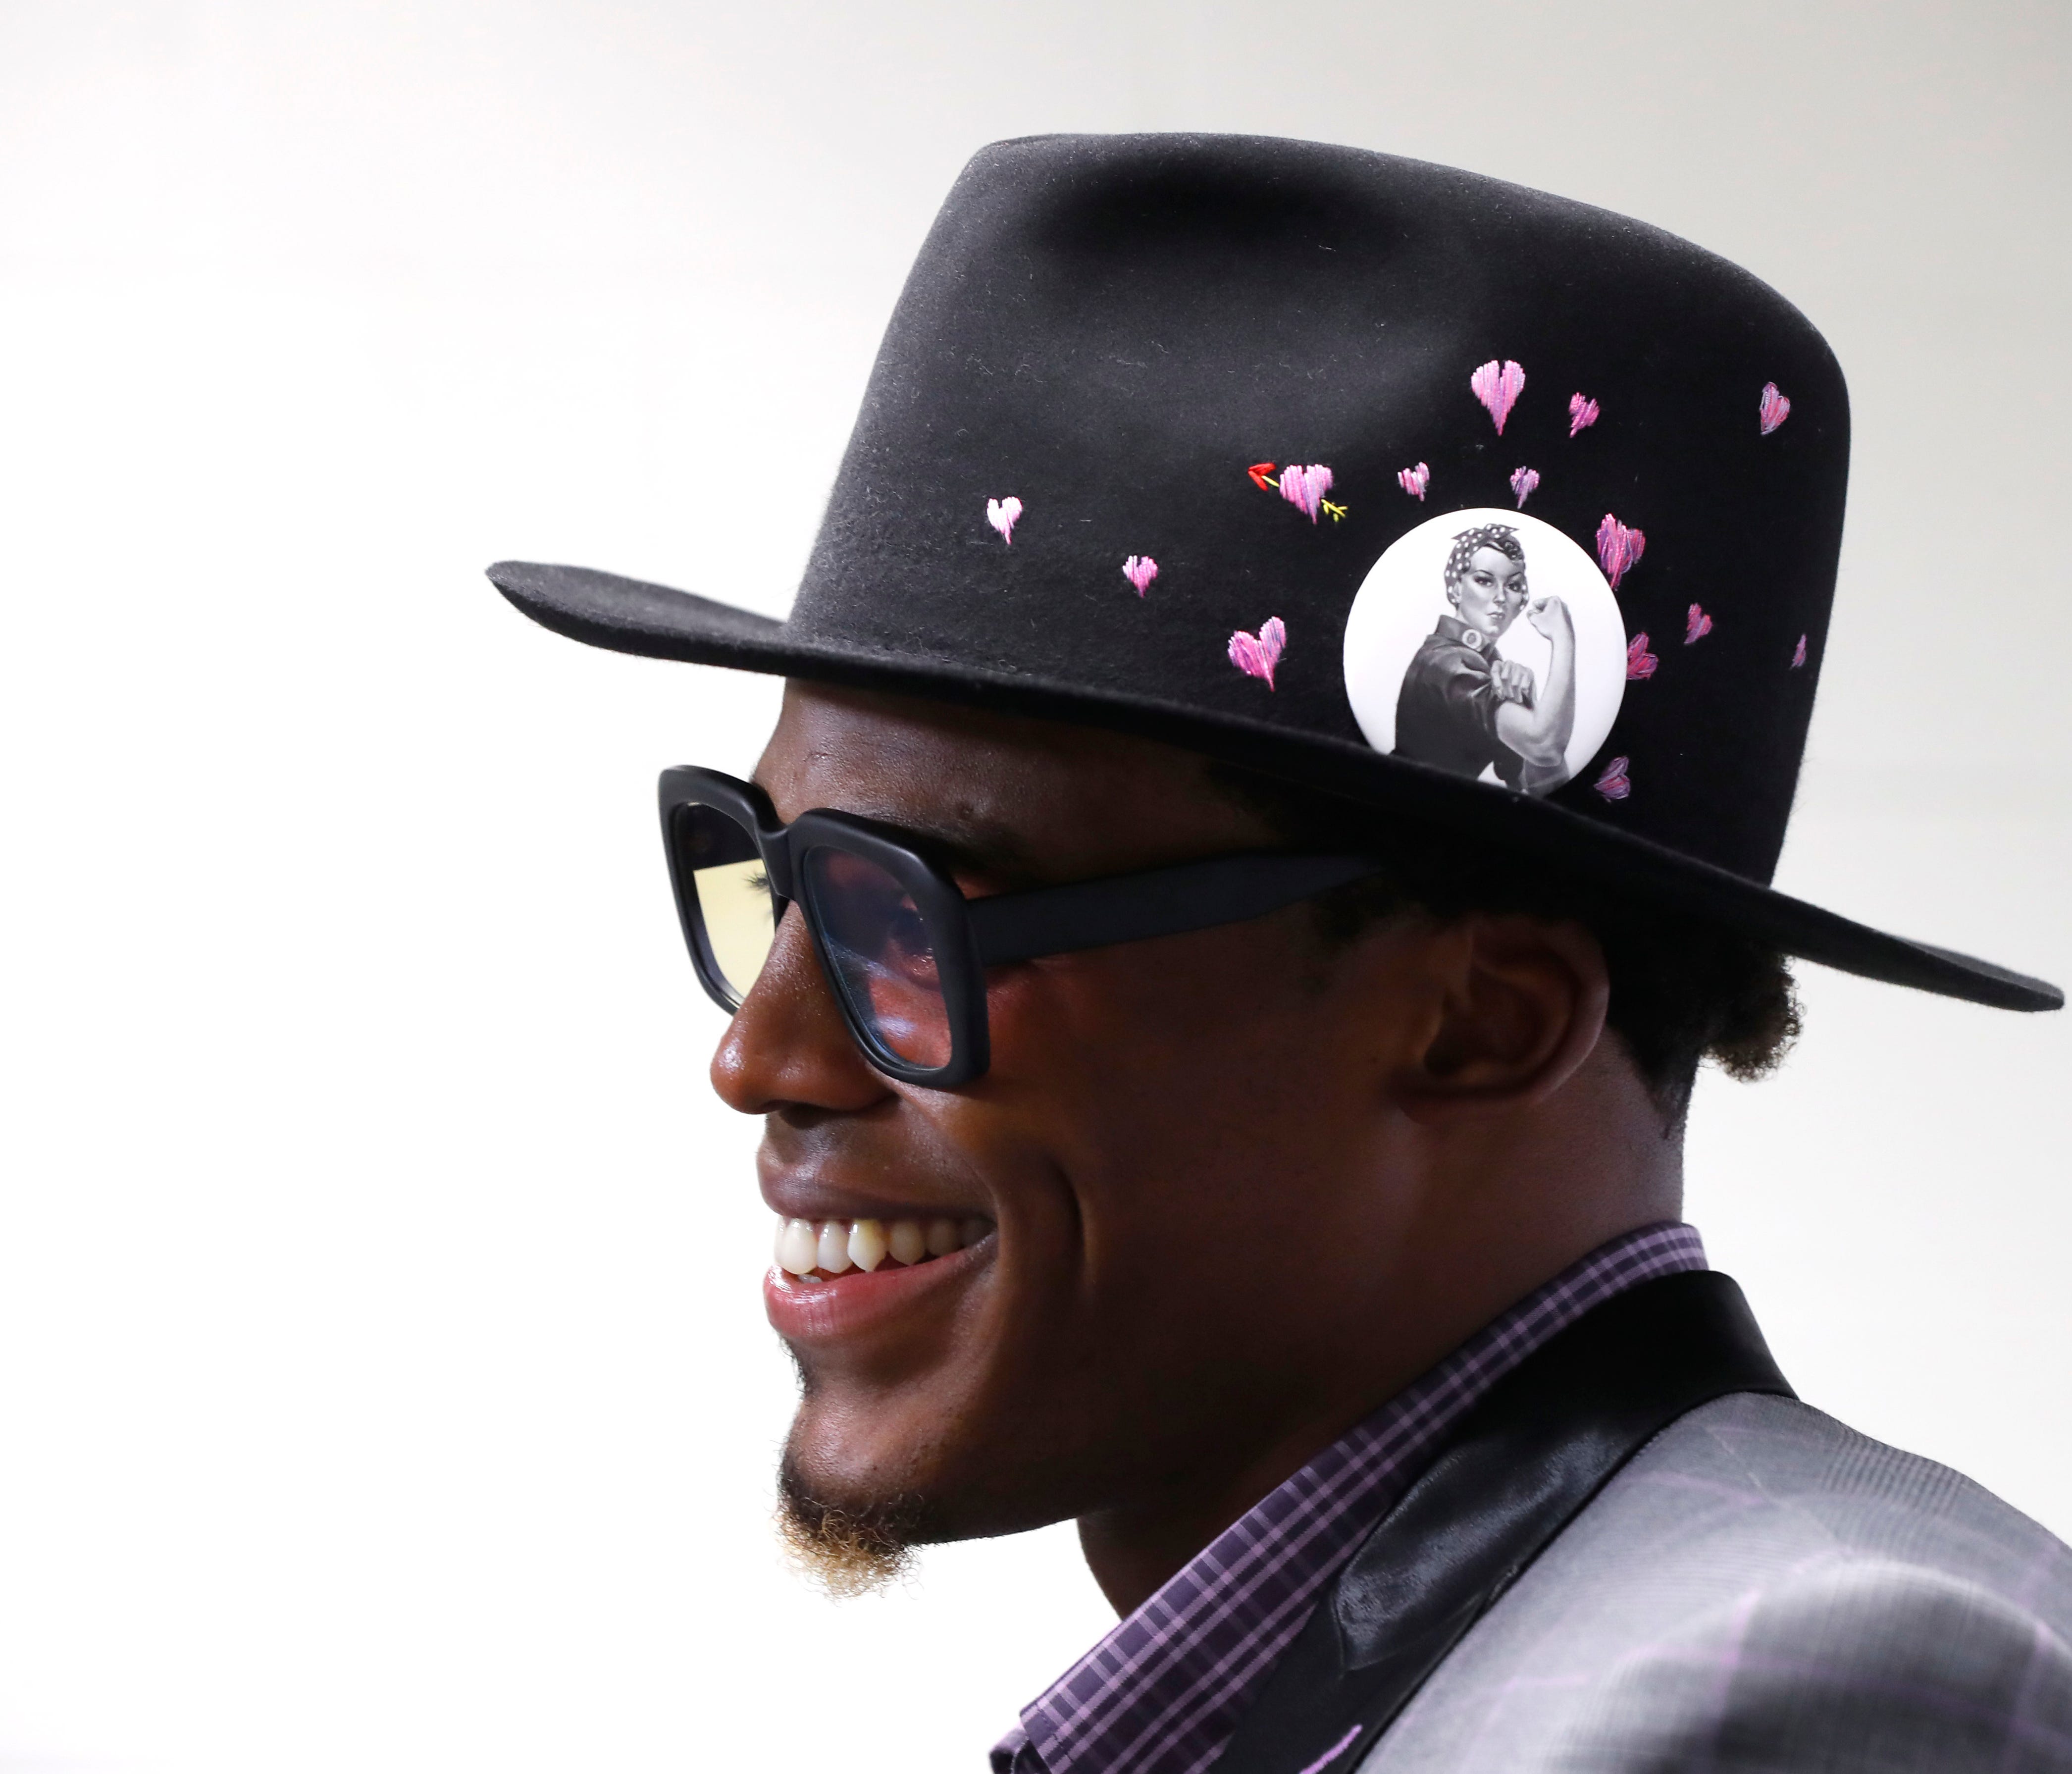 Carolina Panthers quarterback Cam Newton smiles as he speaks after NFL football game against the Detroit Lions in Detroit, Sunday, Oct. 8, 2017. Newton wore a wore a Rosie the Riveter pin on his hat. (AP Photo/Paul Sancya) ORG XMIT: MIPS10